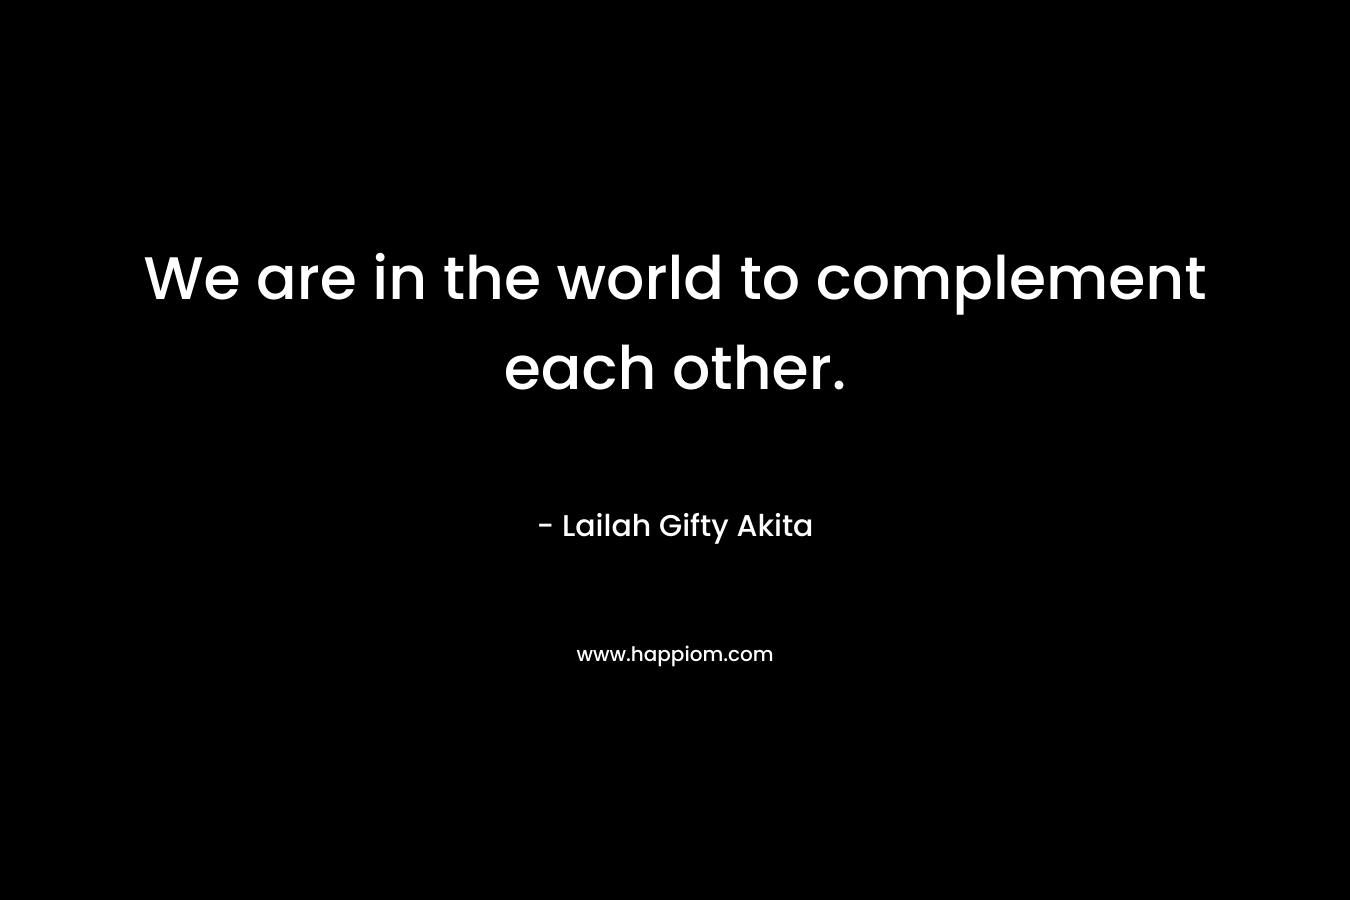 We are in the world to complement each other.